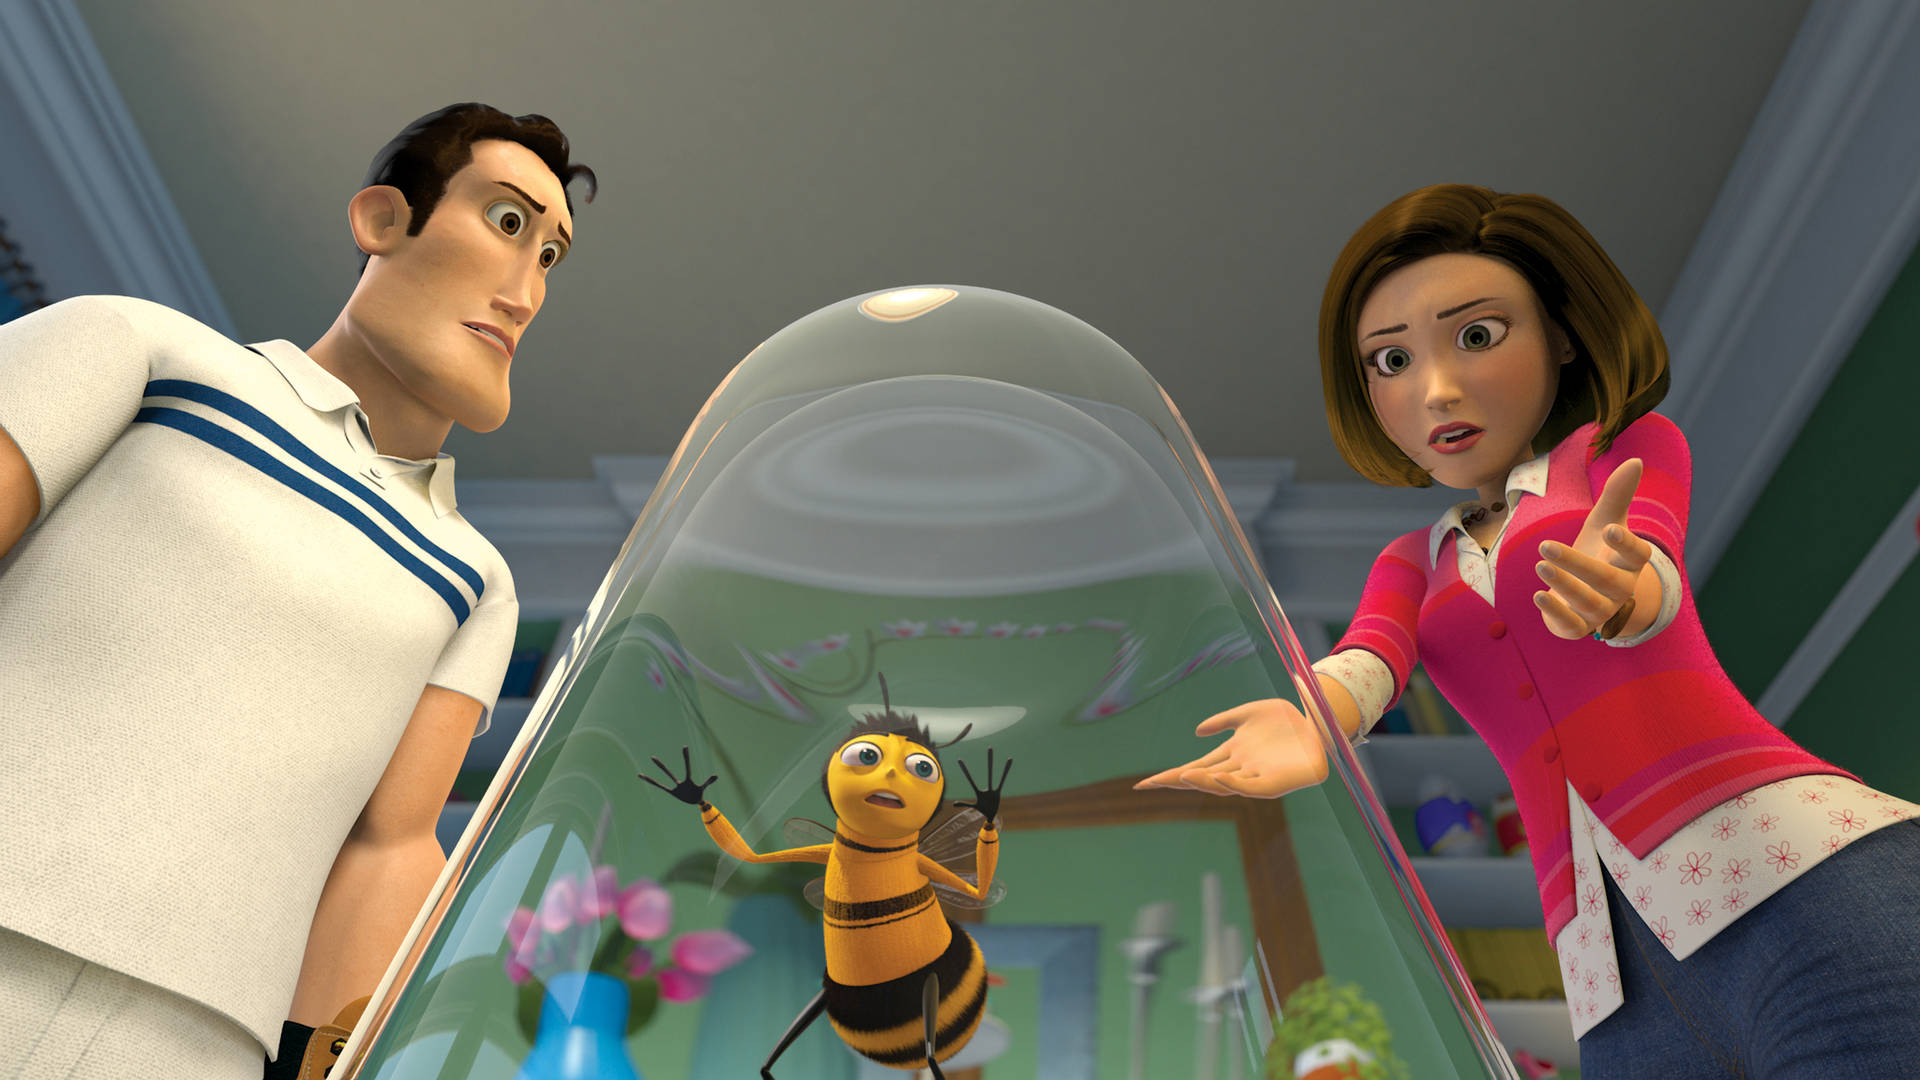 A Man And Woman Are Standing Next To A Bee In A Glass Wallpaper